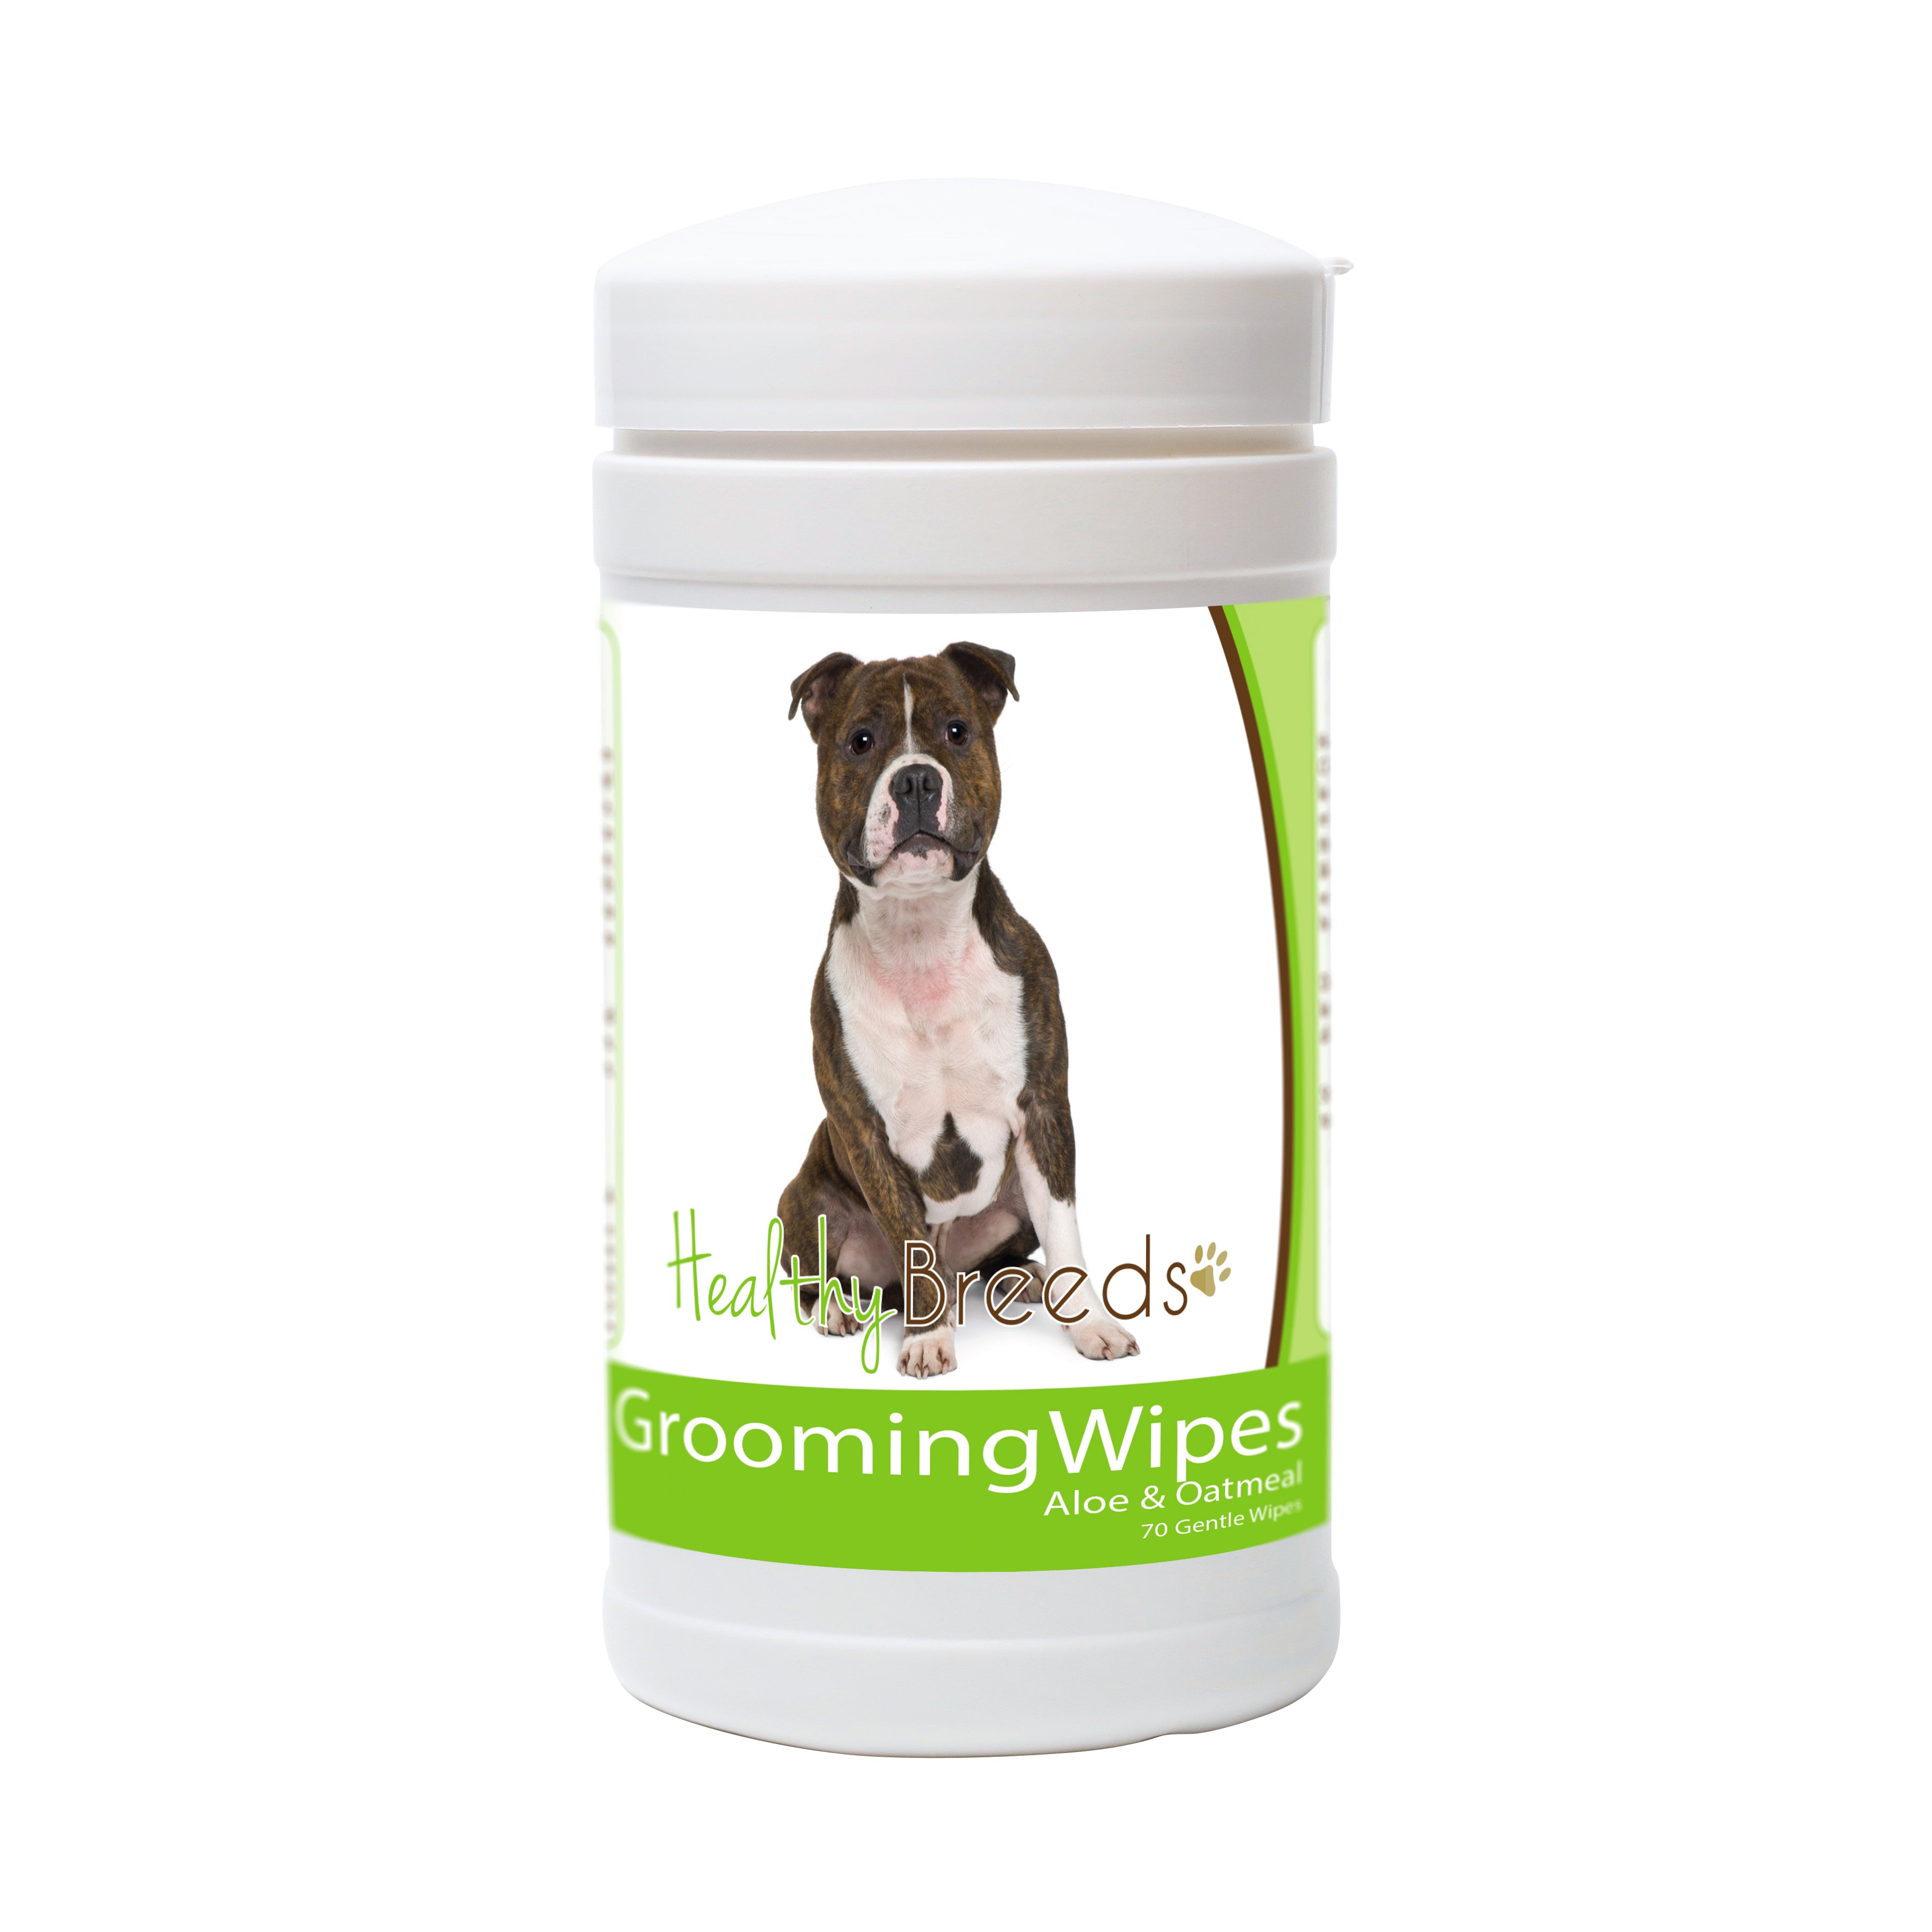 Staffordshire Bull Terrier Grooming Wipes 70 Count